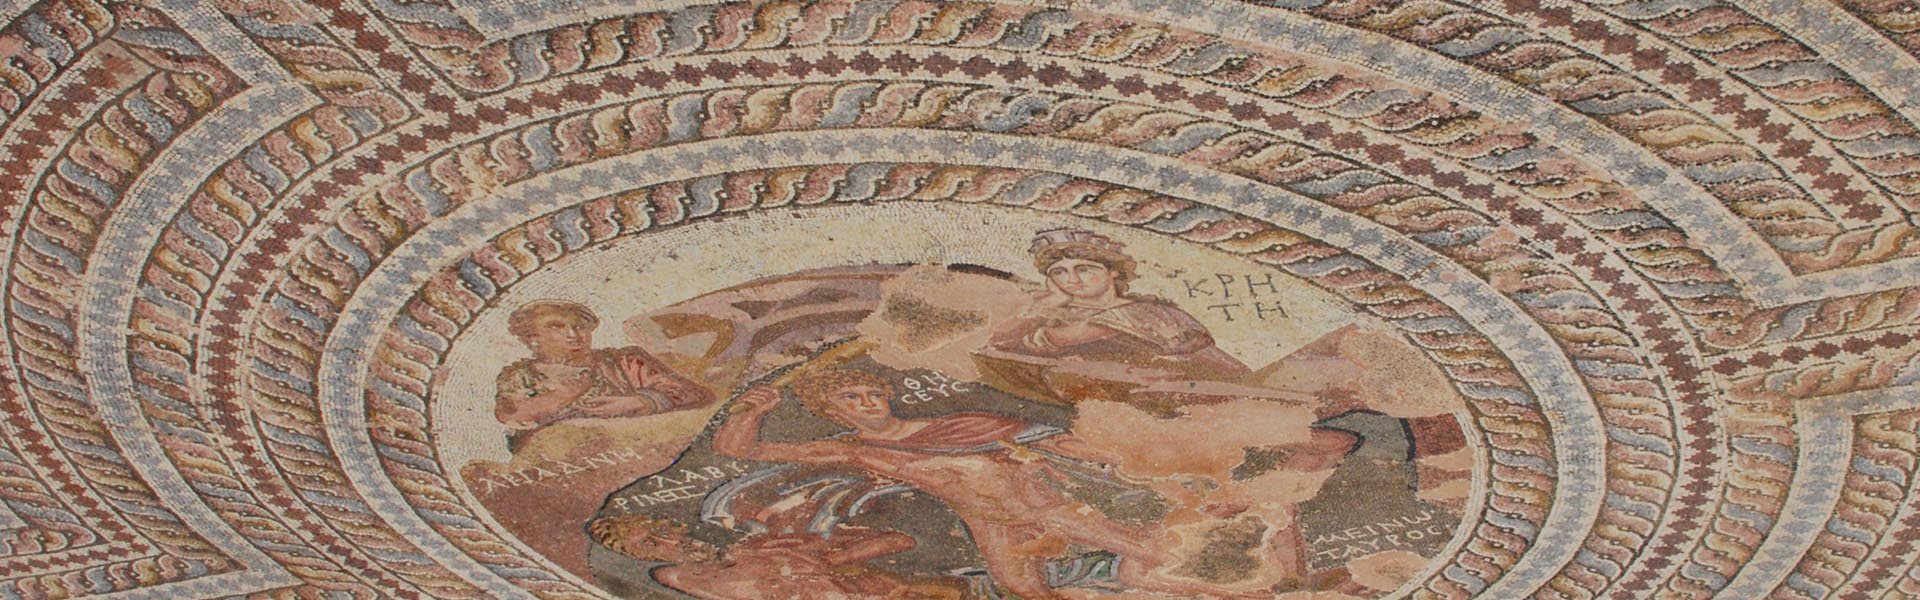 PID000142_Cyprus_Nea-Pafos_2018_06_Mosaic-of-Theseus-and-the-Minotaur-House-of-Theseus-Banner-Page-1920x600